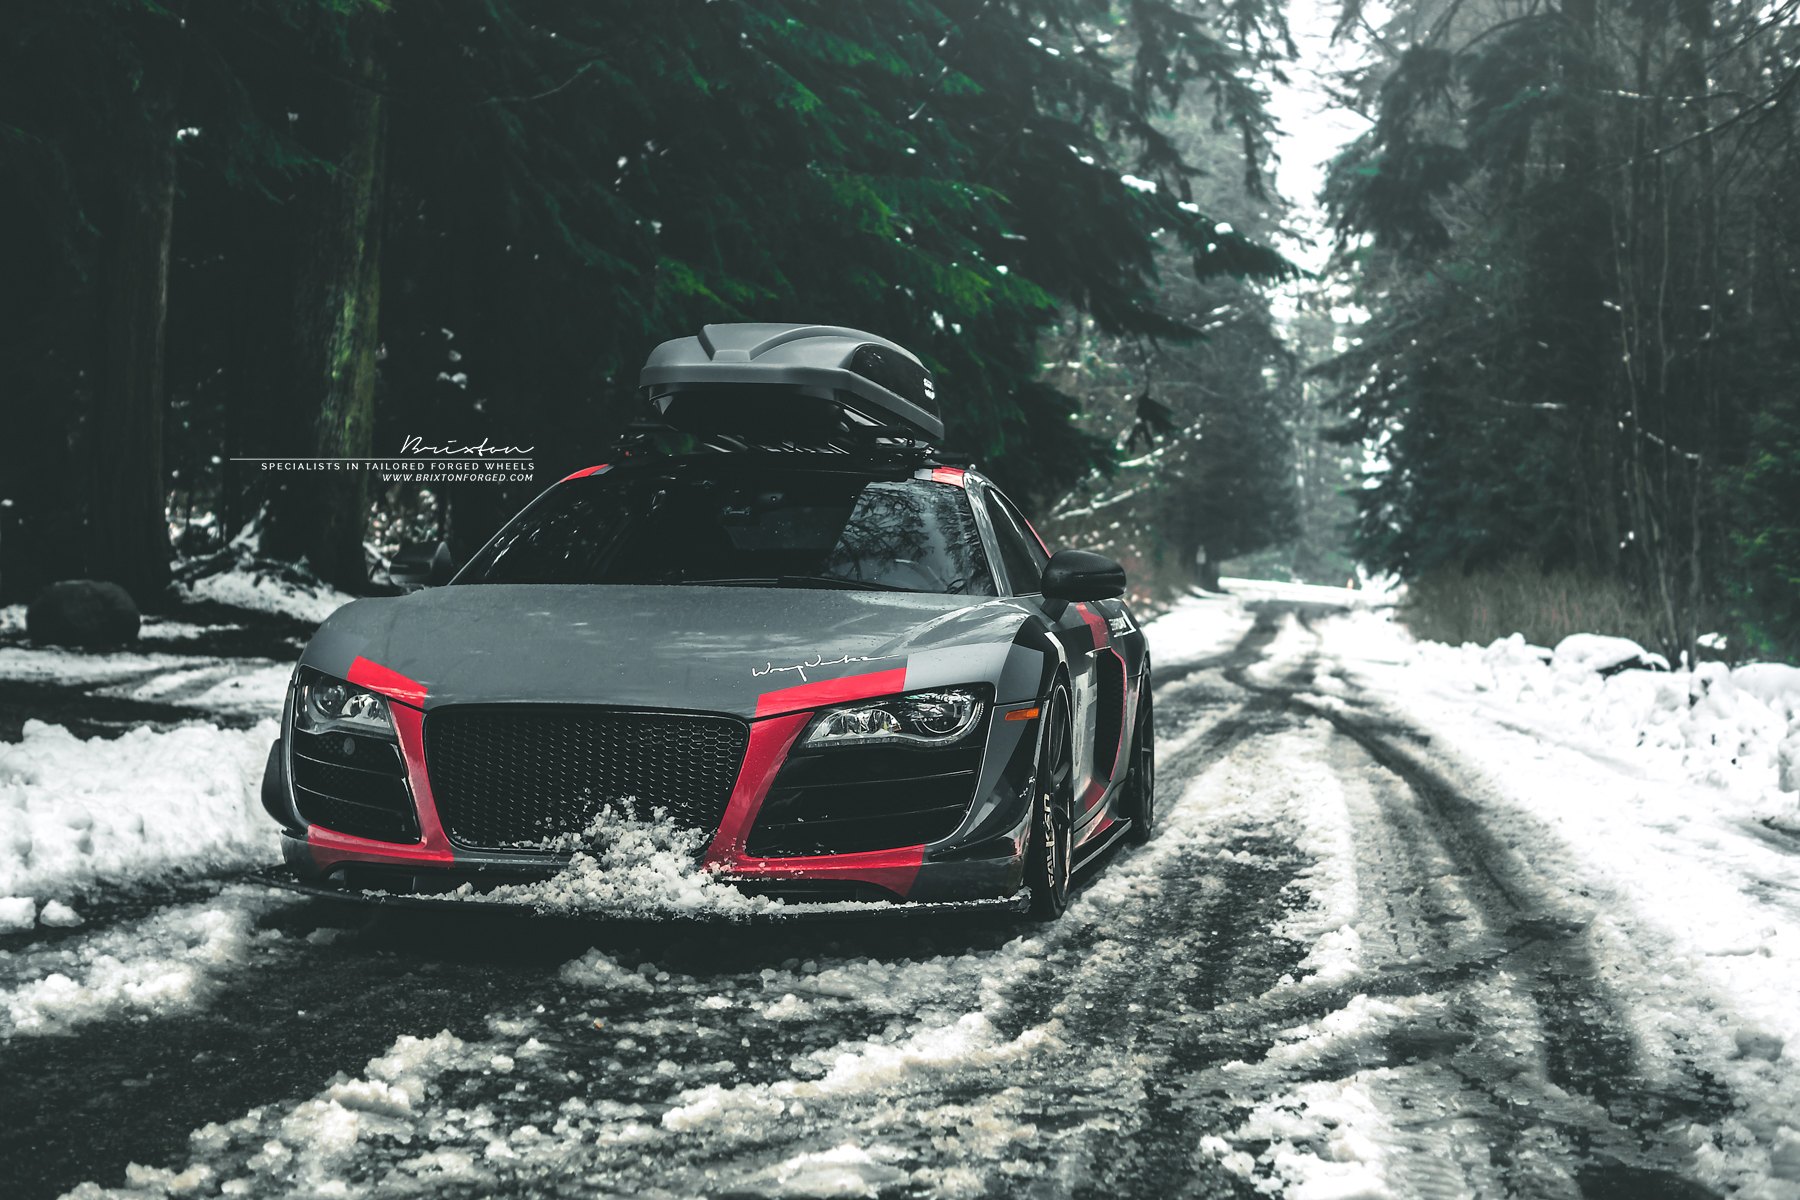 Audi R8 Gains a Custom Paint and Roof Rack — Gallery